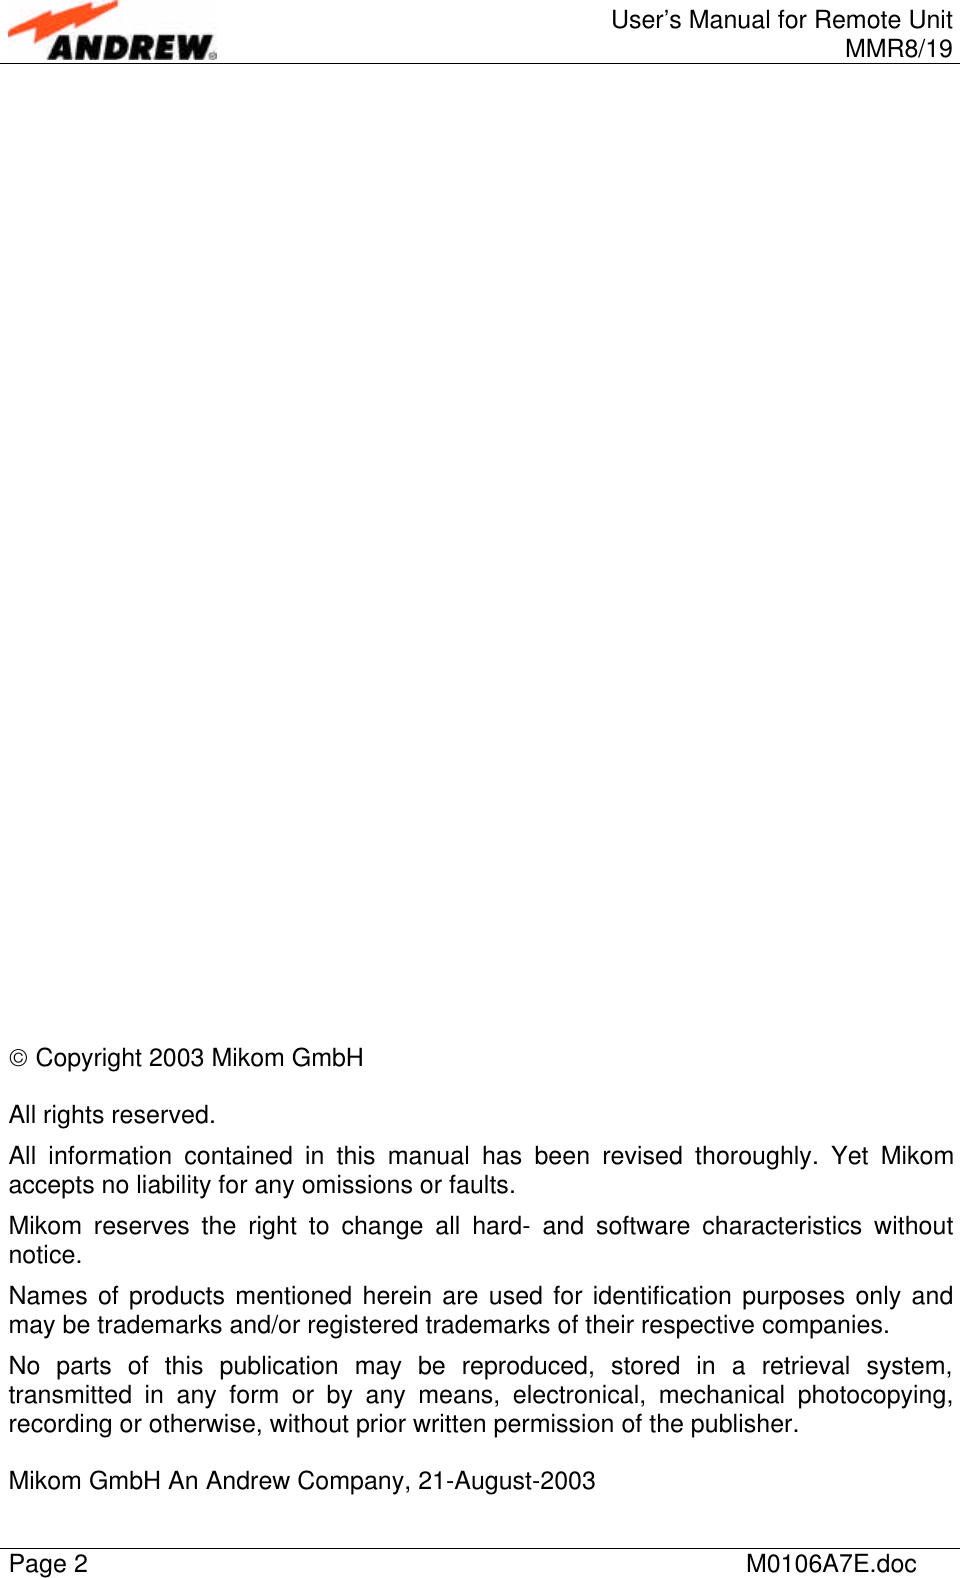 User’s Manual for Remote UnitMMR8/19Page 2M0106A7E.doc Copyright 2003 Mikom GmbHAll rights reserved.All information contained in this manual has been revised thoroughly. Yet Mikomaccepts no liability for any omissions or faults.Mikom reserves the right to change all hard- and software characteristics withoutnotice.Names of products mentioned herein are used for identification purposes only andmay be trademarks and/or registered trademarks of their respective companies.No parts of this publication may be reproduced, stored in a retrieval system,transmitted in any form or by any means, electronical, mechanical photocopying,recording or otherwise, without prior written permission of the publisher.Mikom GmbH An Andrew Company, 21-August-2003